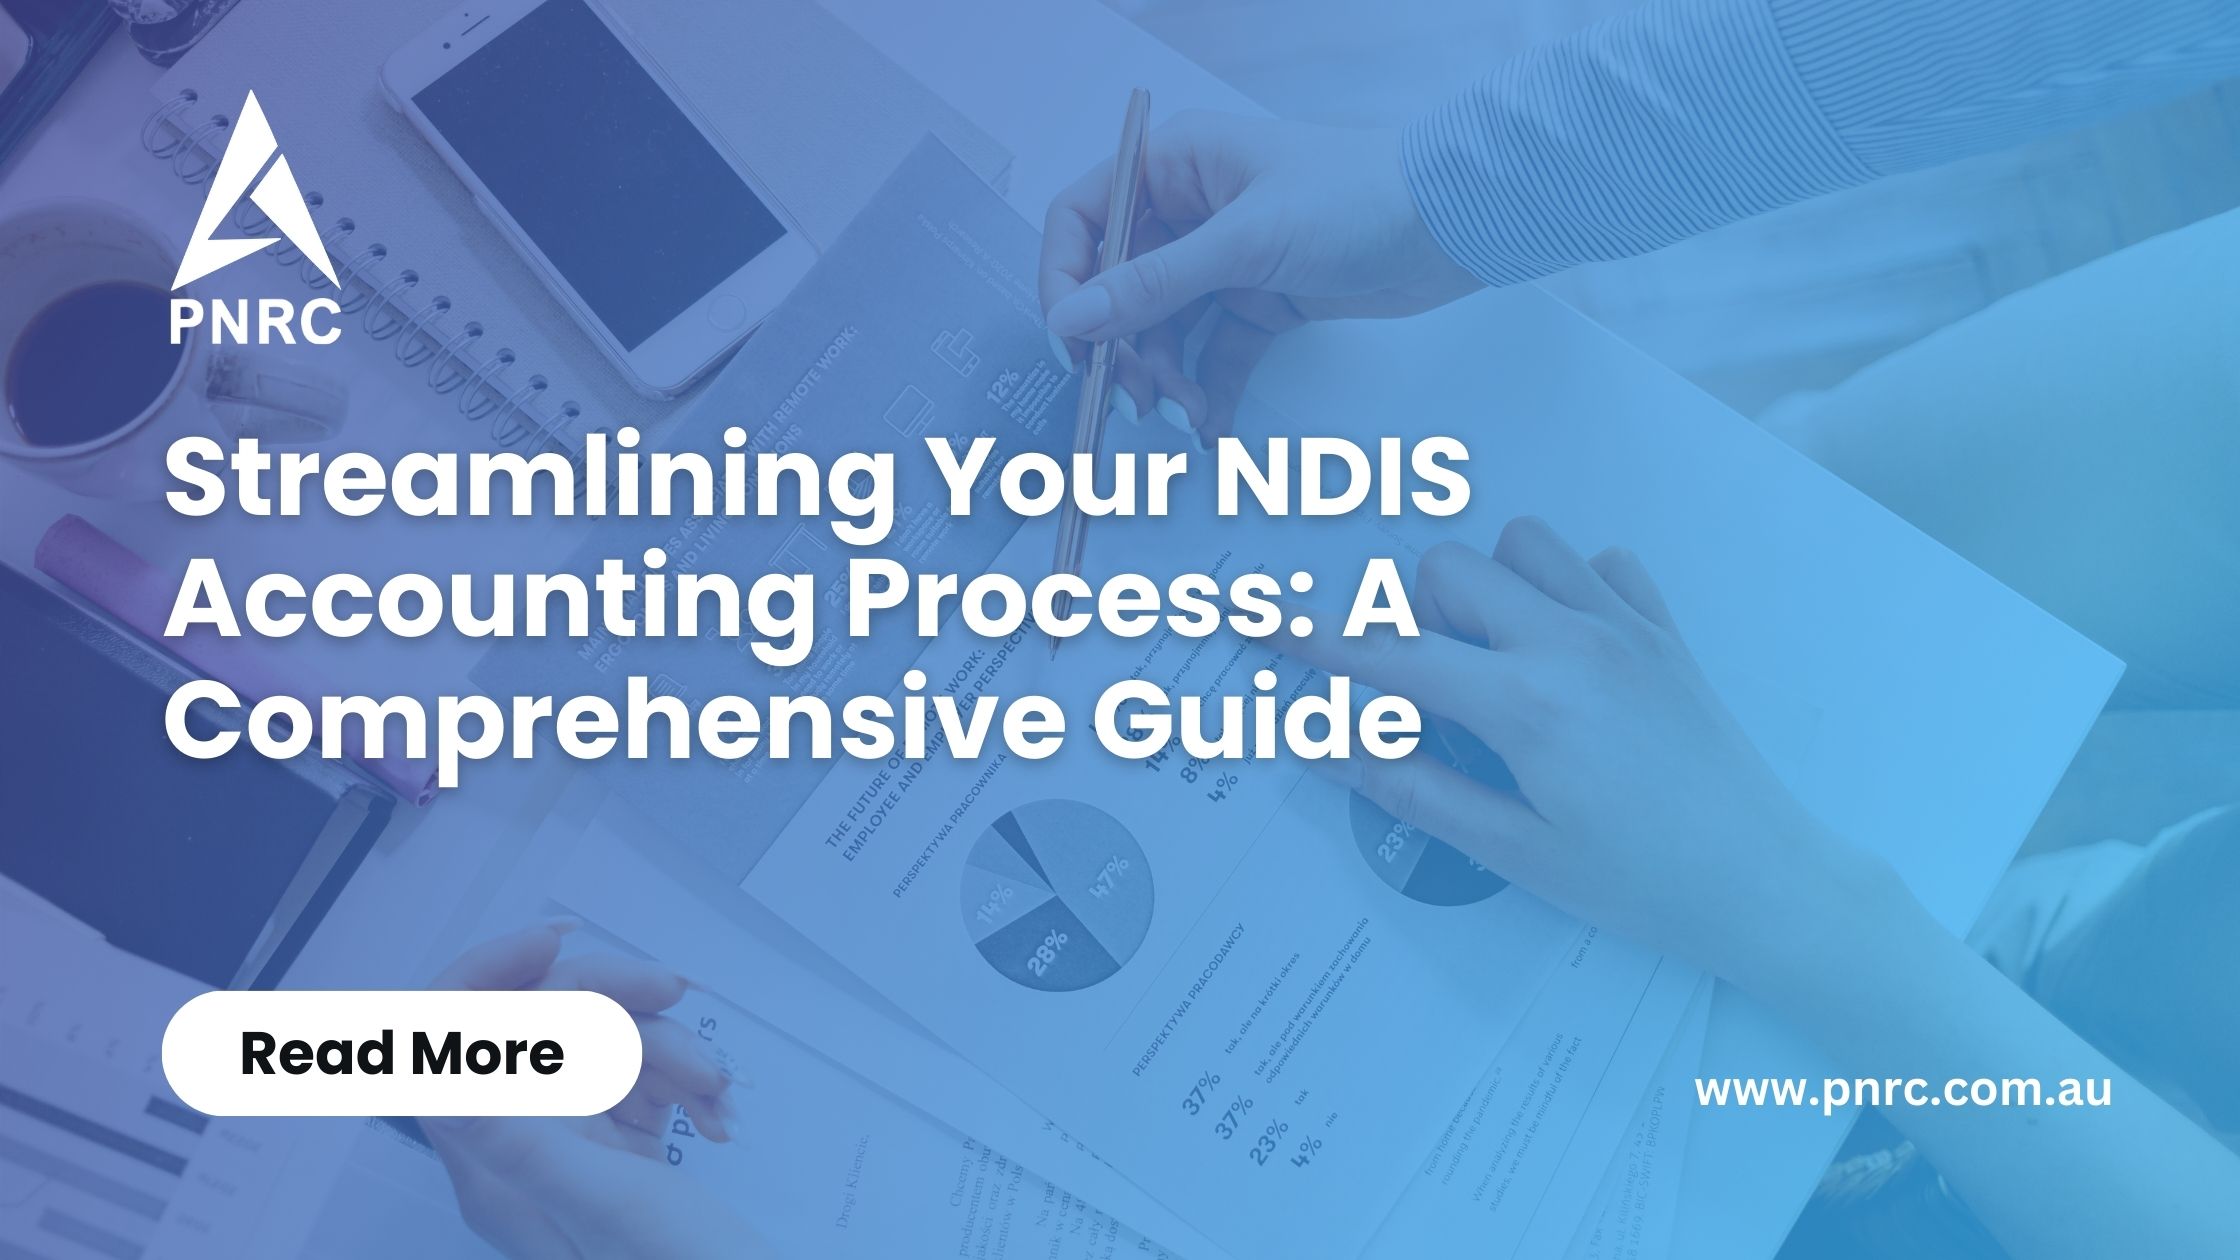 Streamlining Your NDIS Accounting Process: A Comprehensive Guide